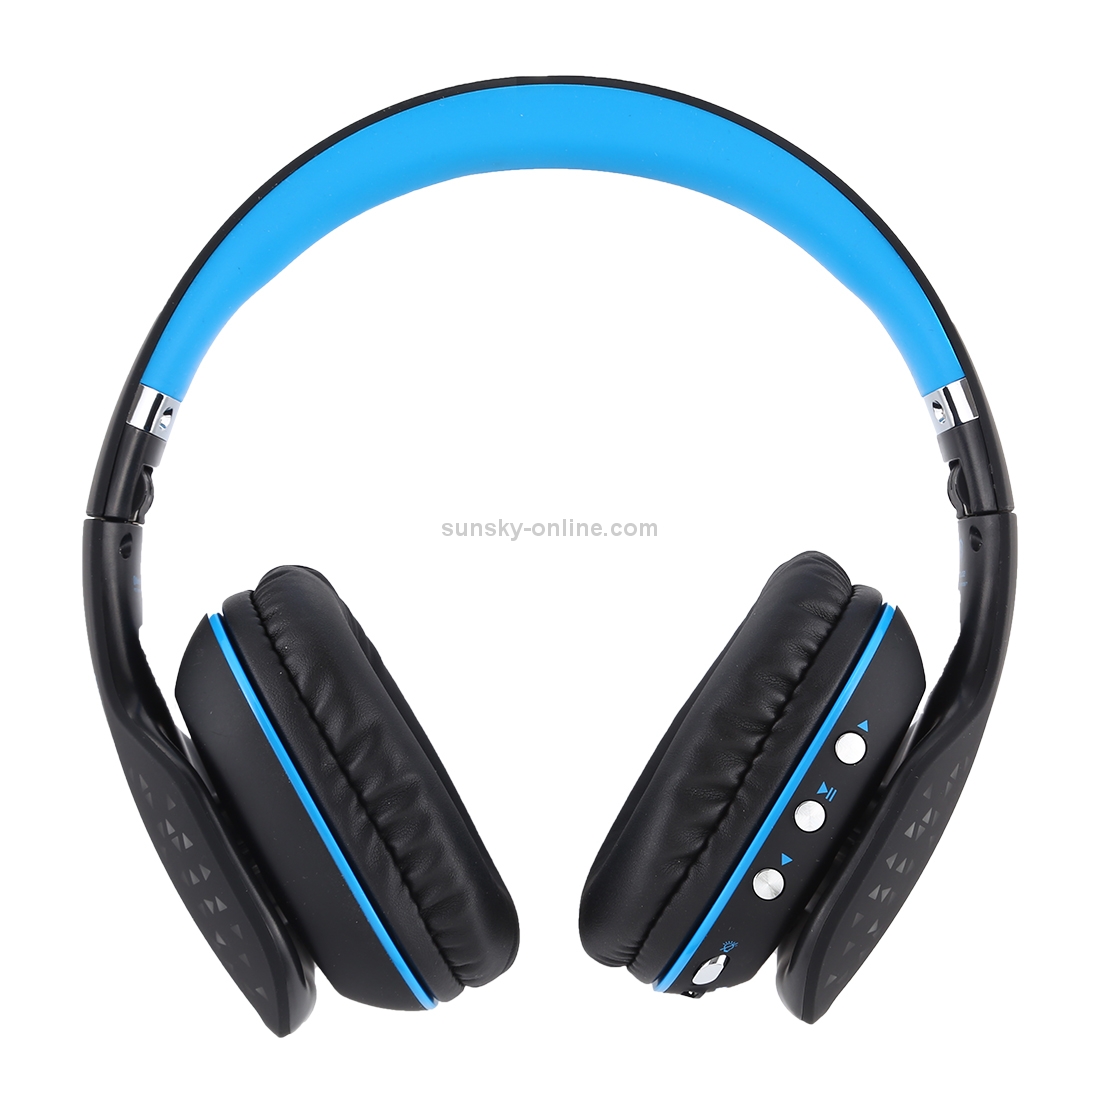 Versterken Mens Boer SUNSKY - Beexcellent Q2 Dynamic Stereo Gaming Wireless Bluetooth Headset  with LED Light for PS4, Smartphone, Tablet, PC, Notebook(Blue)